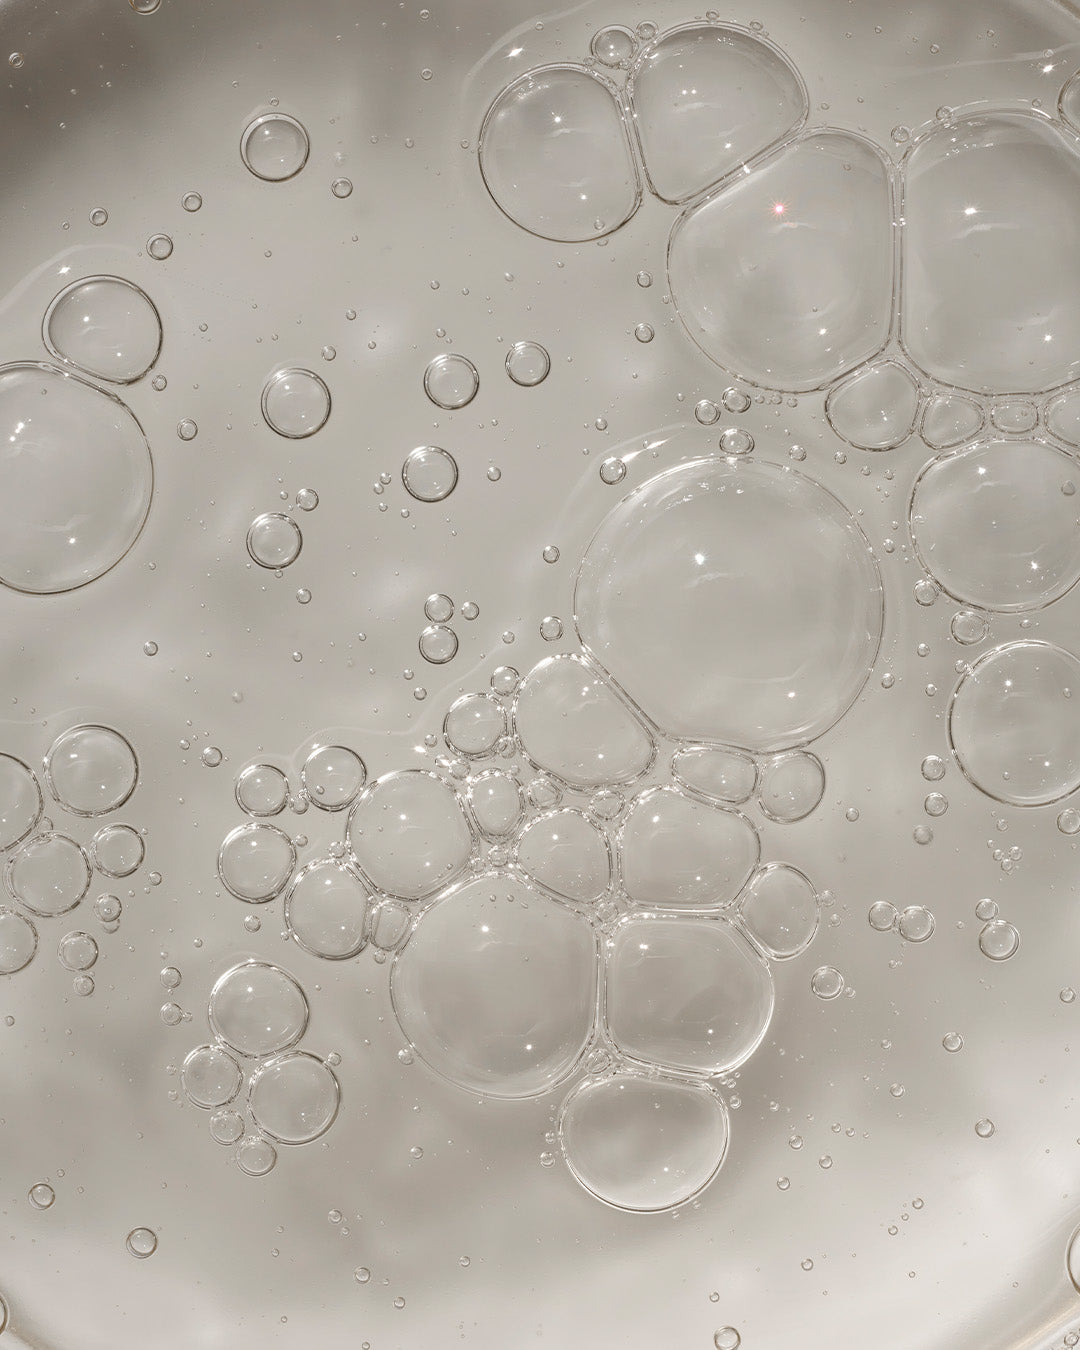 Arkive's all day extra shampoo out the bottle close up with bubbles